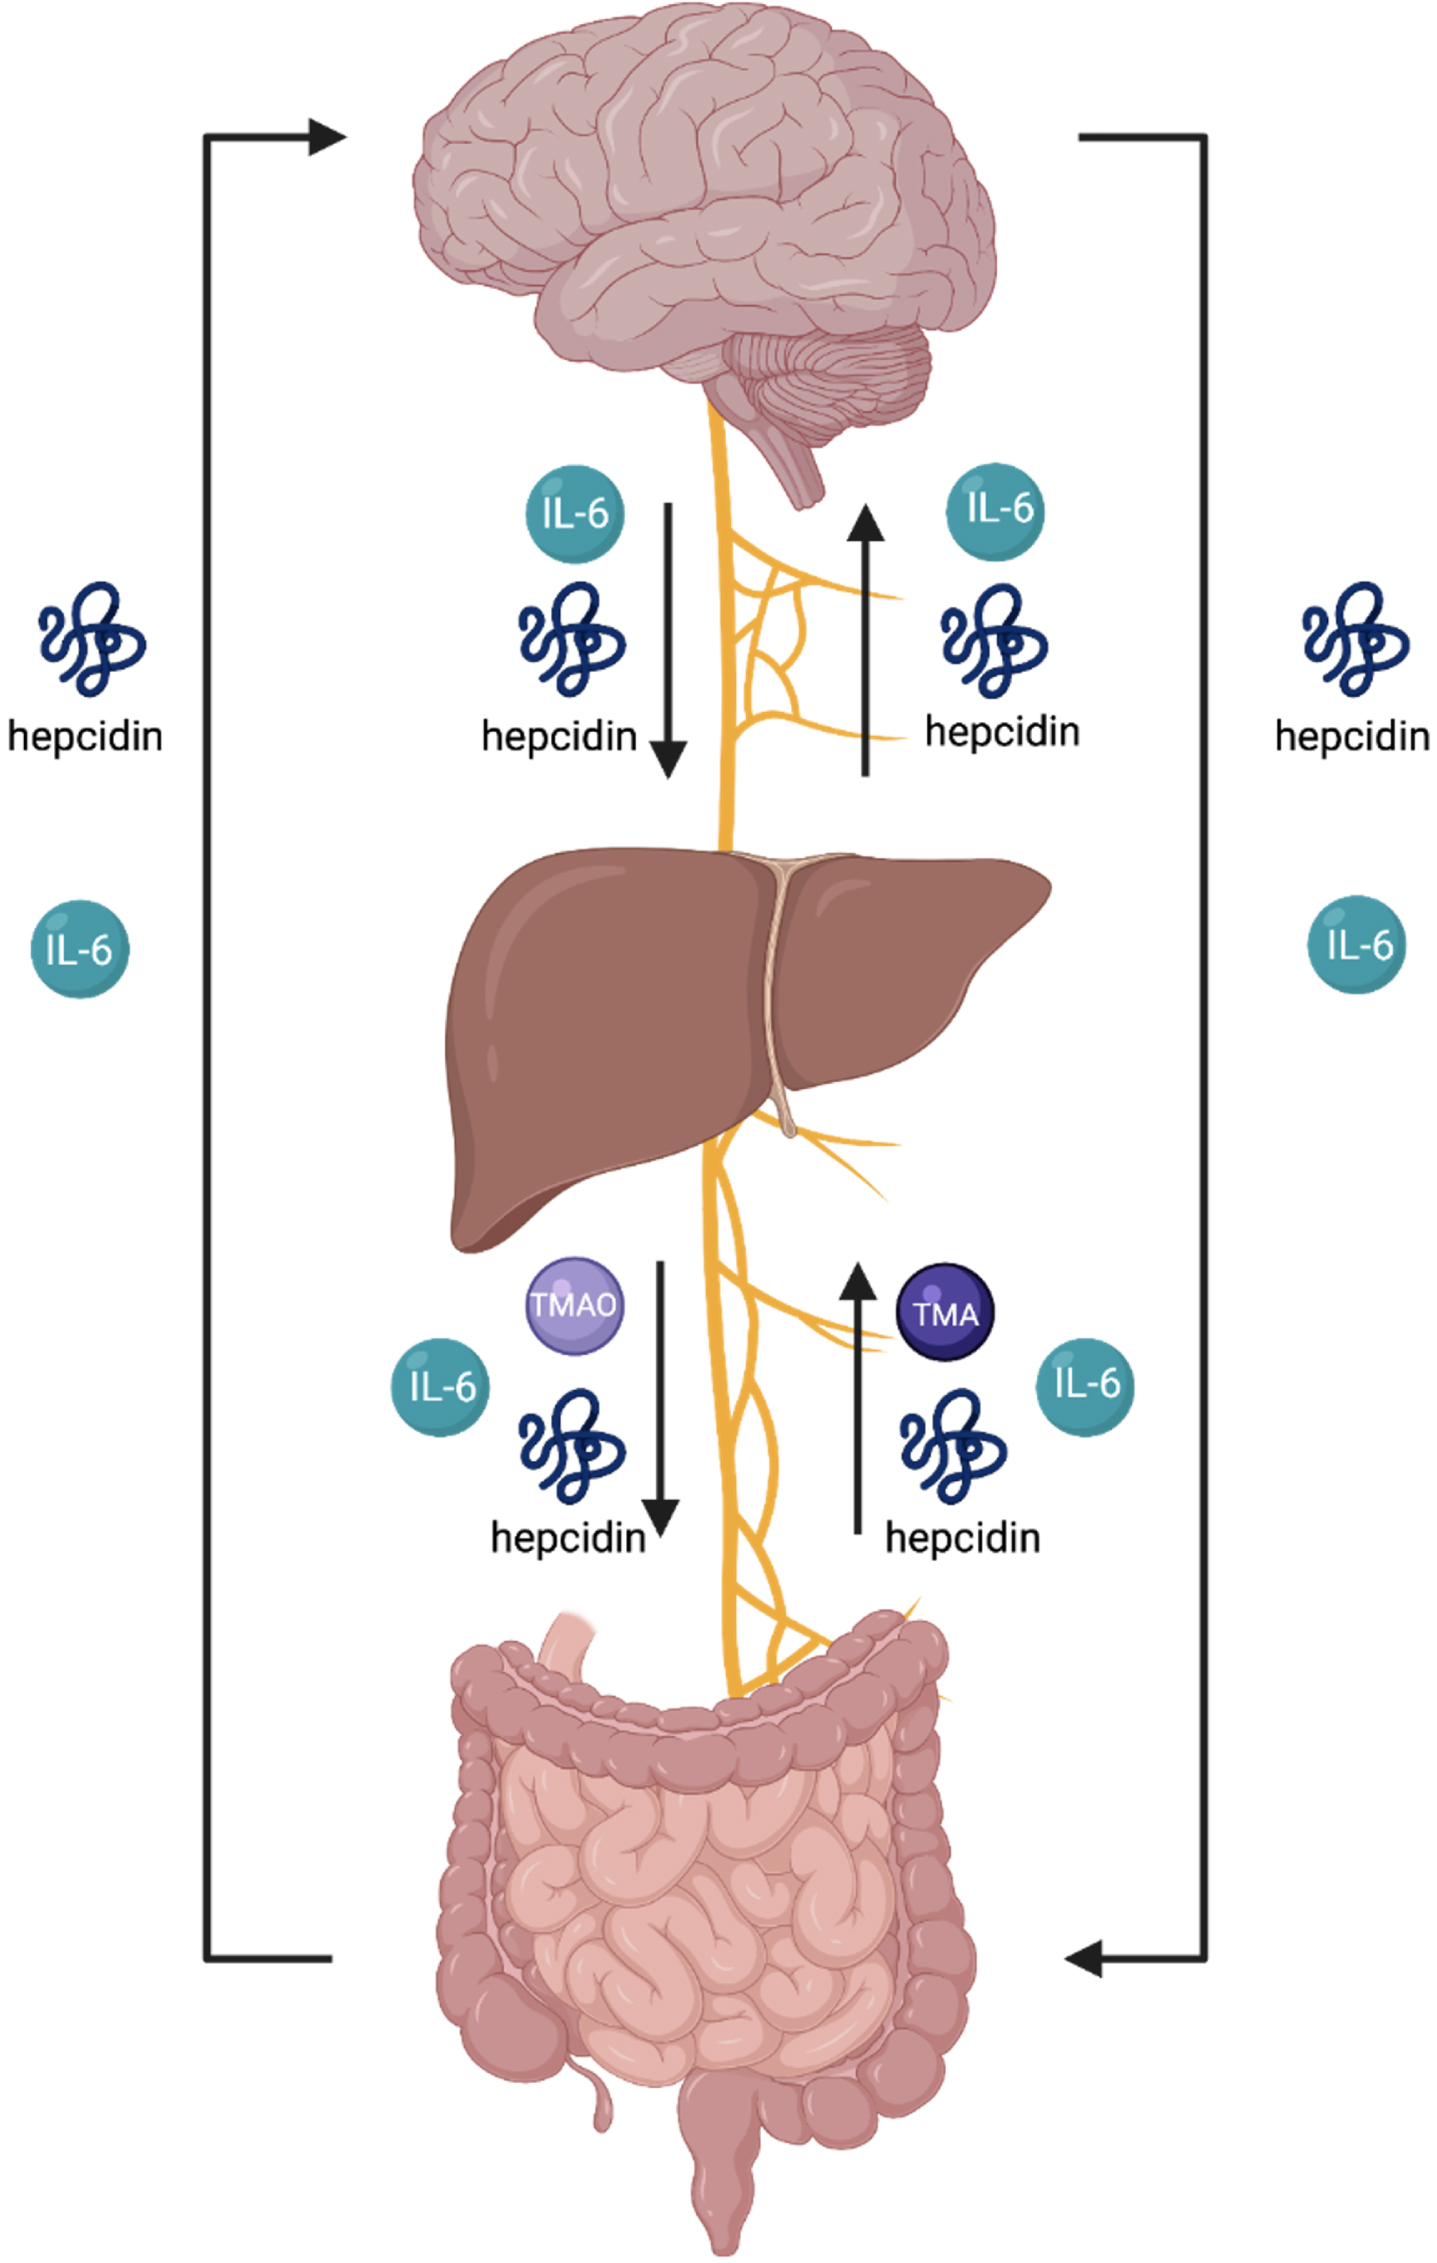 The endocrine summary of the gut-brain axis (GBA) involves an endocrine and neural communication between the brain, liver and intestines via several biomolecules and the vagus nerve. The arrows in this figure indicate the flow of each biomolecule. An overproduction of TMAO signifies overdevelopment of pathogenic gut bacteria and induces activation of macrophages, onsetting the secretion of IL-6, thus, initiating collective activation of microcascade inflammatory responses to absorb bacteria in attempt to mediate gut dysbiosis. IL-6 is unregulated in inflammation and involved in the regulation of neural processes. As the liver produces hepcidin, the sustained overproduction of hepcidin and IL-6 is stimulated throughout blood circulation. The hepcidin ascending to the brain is derived from circulation and further expressed through the production of iron-load and inflammation. The brain’s reactivity in response to overproduction sequesters iron to neurons. The activation of hepcidin results in the shutdown of ferroportin in neural cells. The increase of iron in neural cells activates an oxidative state in the brain. The brain is highly susceptible to oxidative damage. Imbalance of gut dysbiosis, thus, plays a major role in the pathophysiology and pathogenic mechanism for neurodegenerative diseases as a primary contributor.